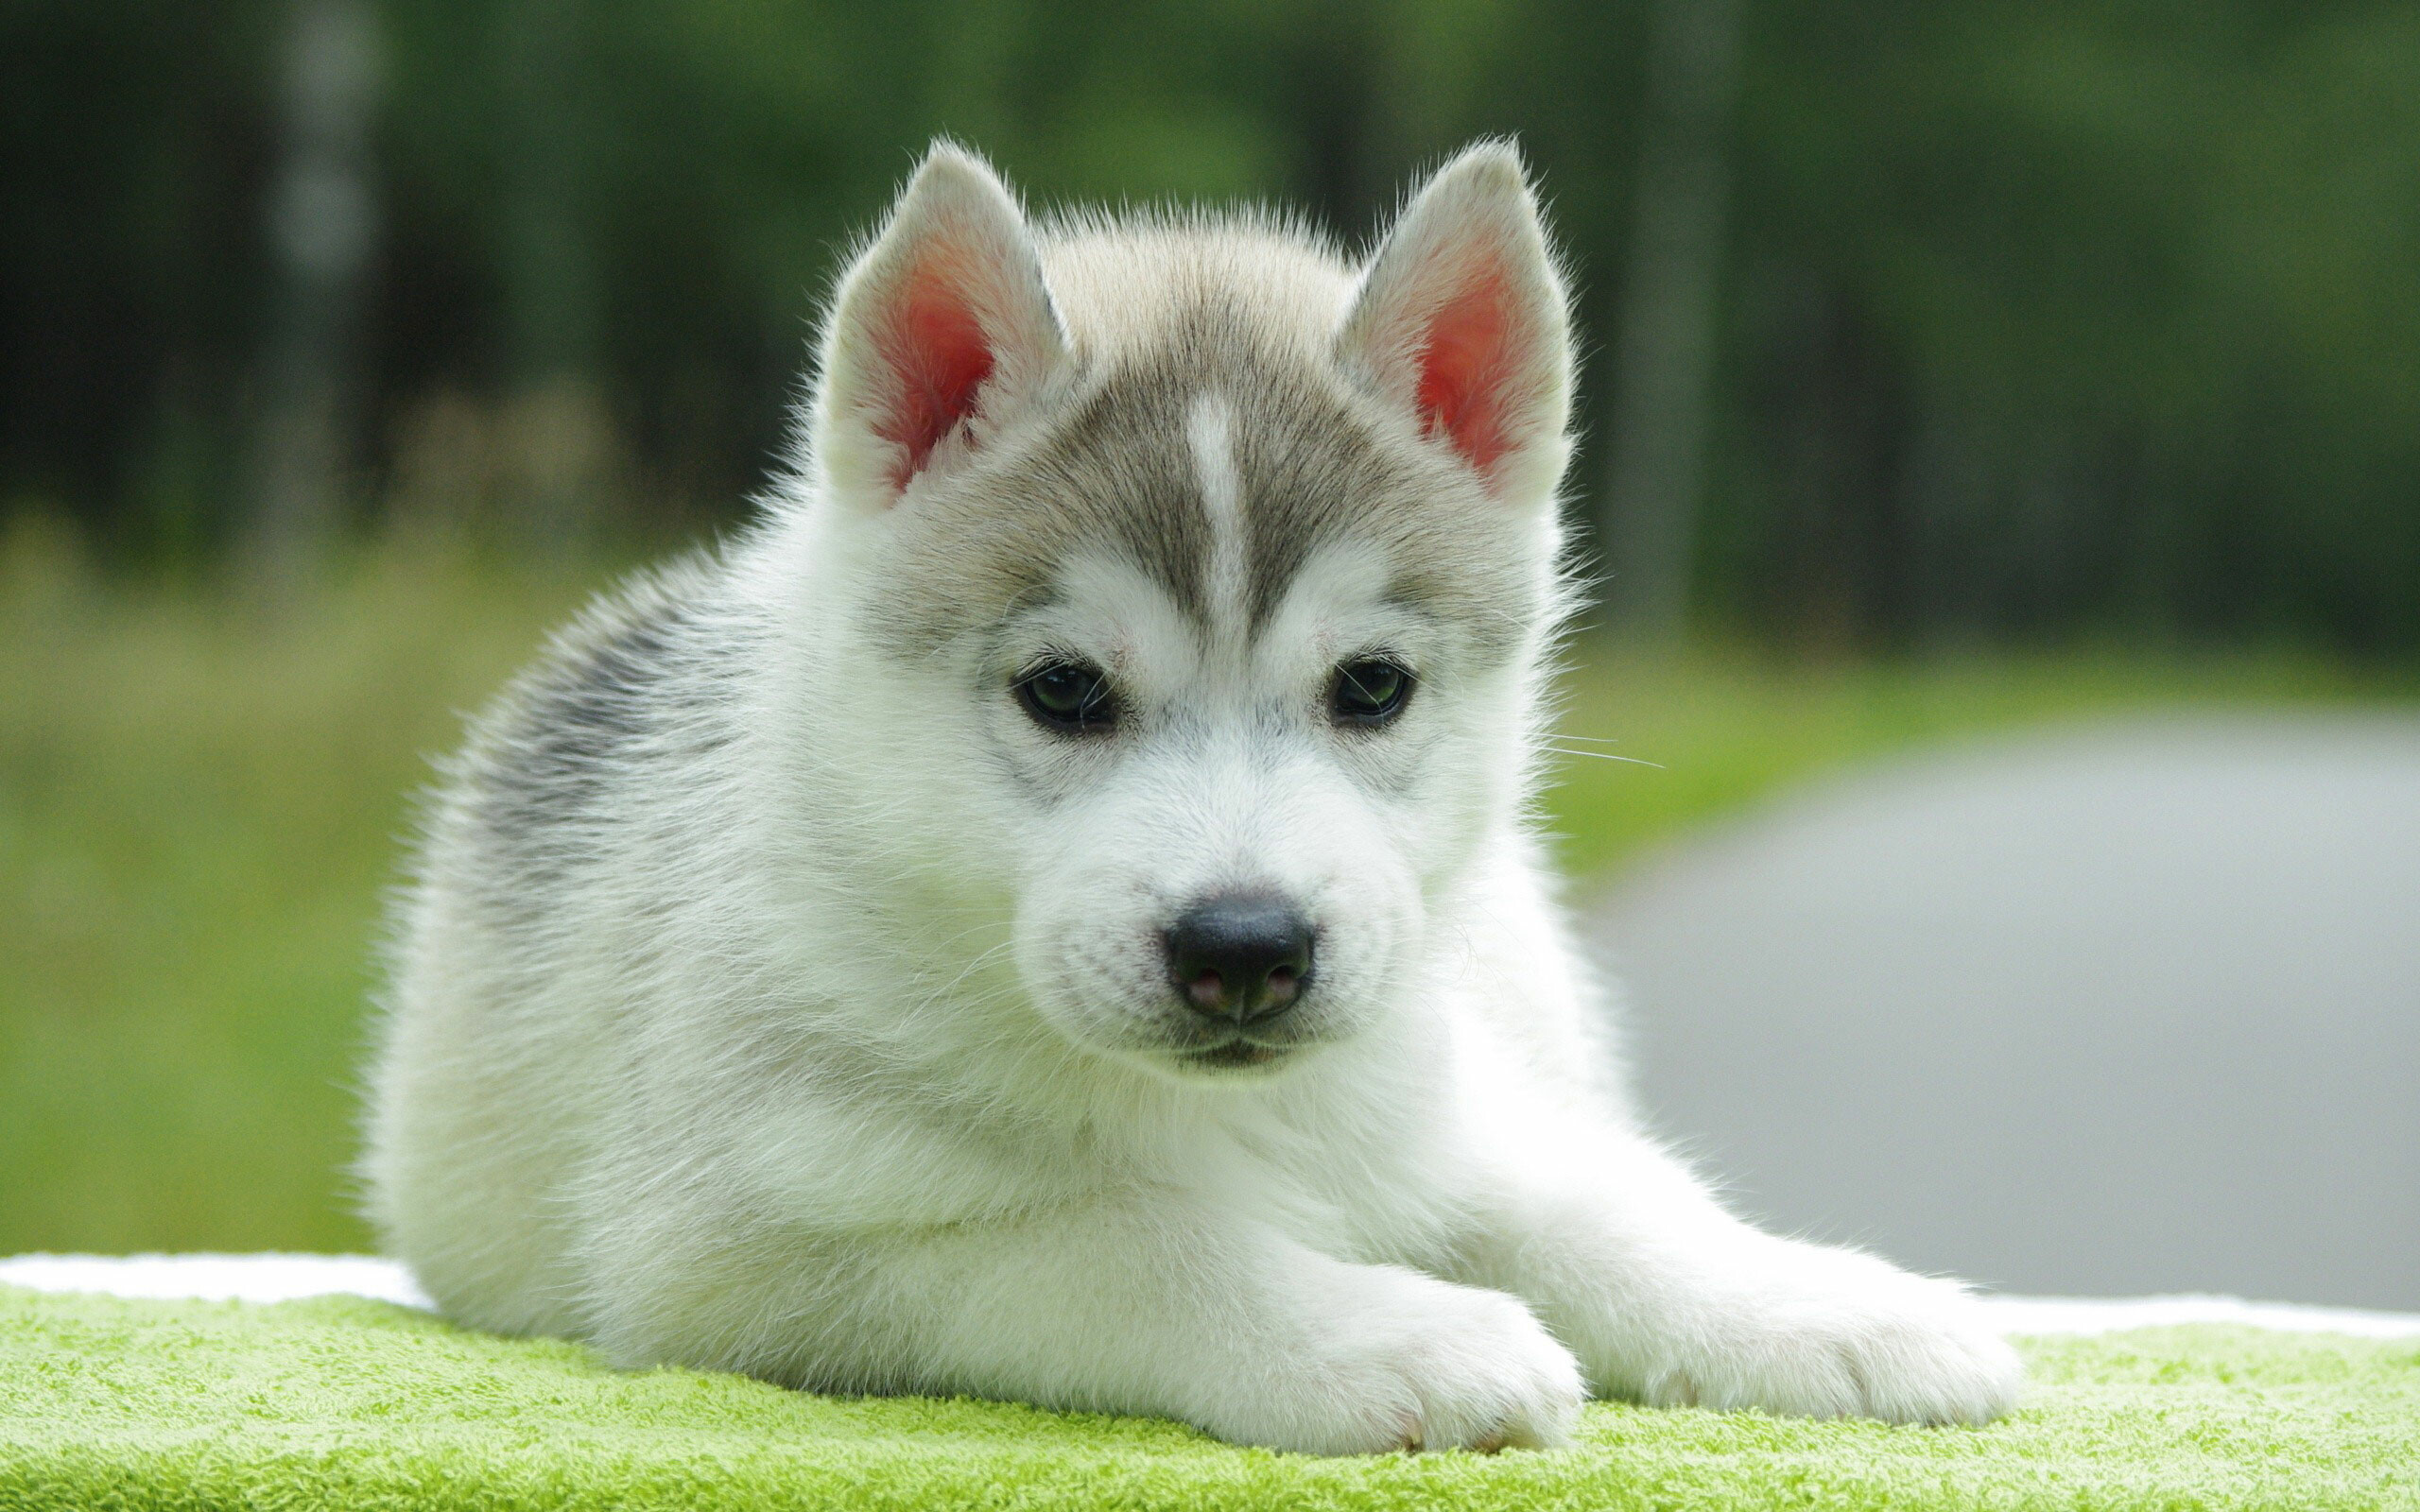 Puppy: Husky, Breed of working dog raised in Siberia by the Chukchi people. 2560x1600 HD Wallpaper.